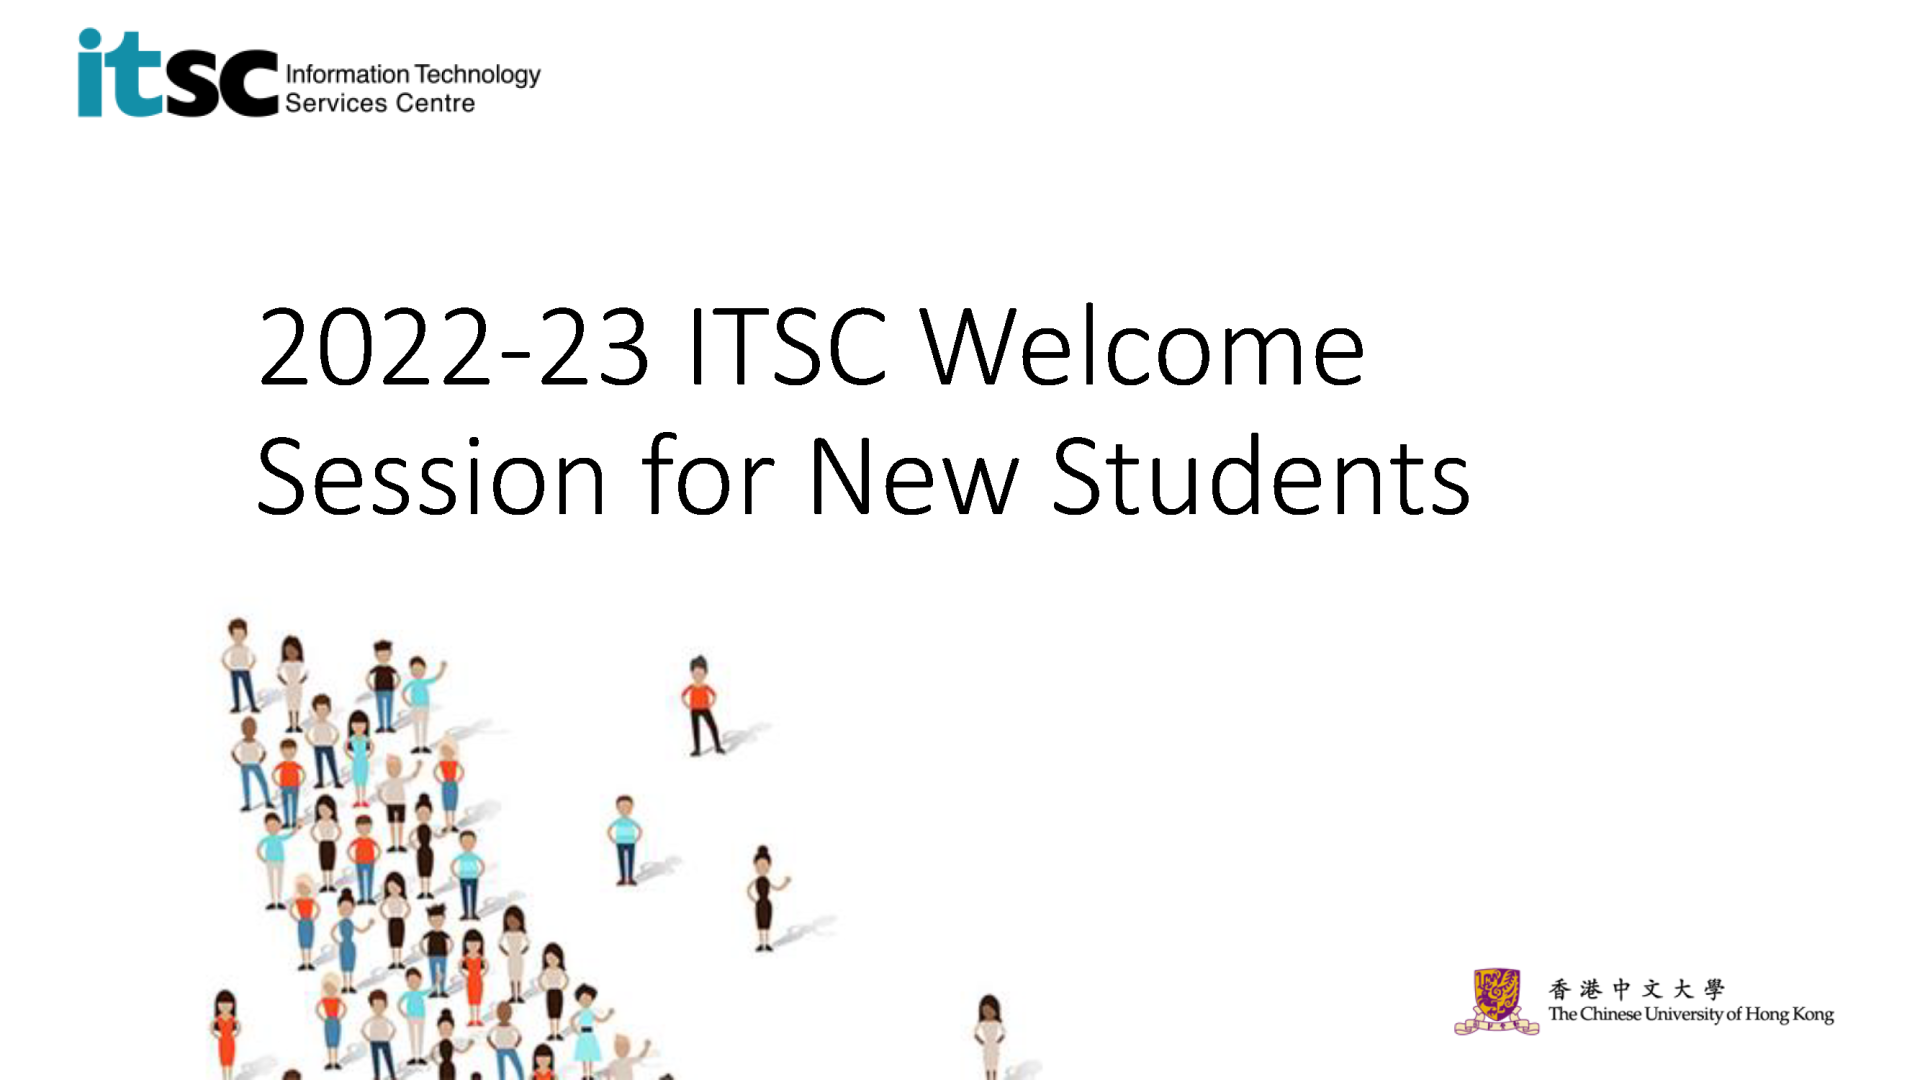 2022-23 ITSC Welcome Session for New Students